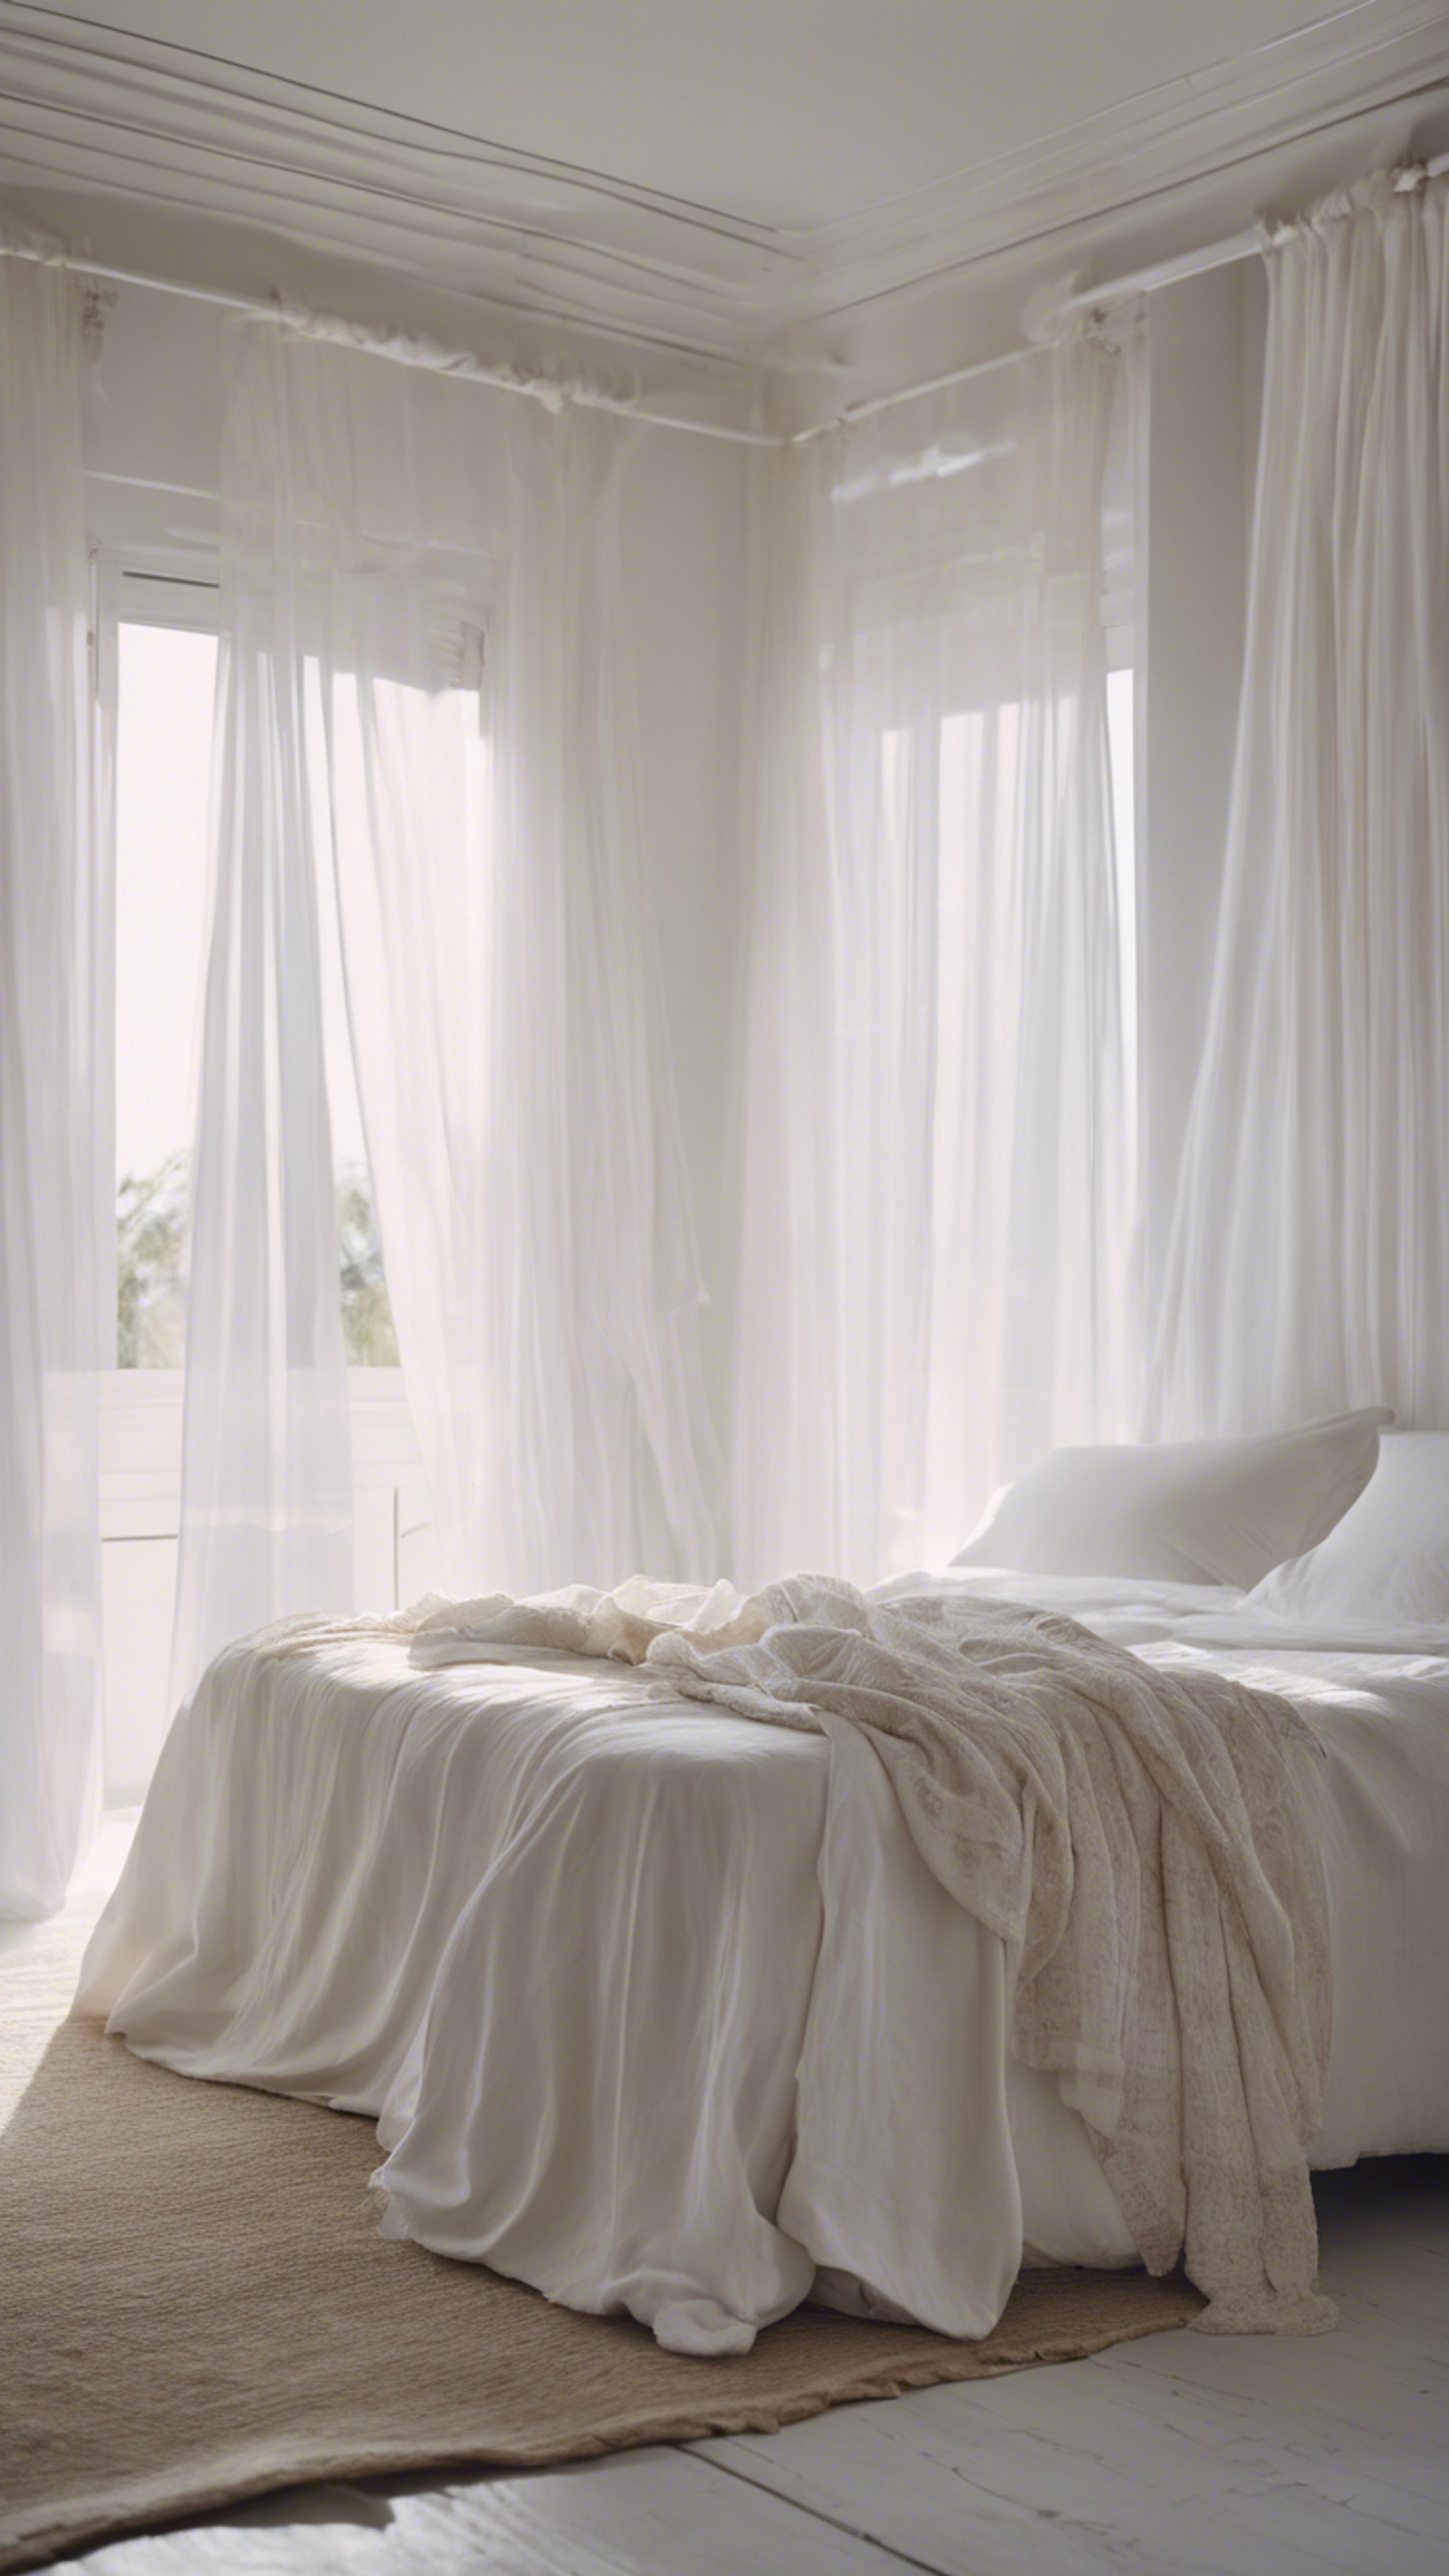 A dreamy white bedroom with sheer curtains blowing in the wind, white bed linens and an array of daylight from the window. Sfondo[01f8a65ac1ab4b5d8d2d]